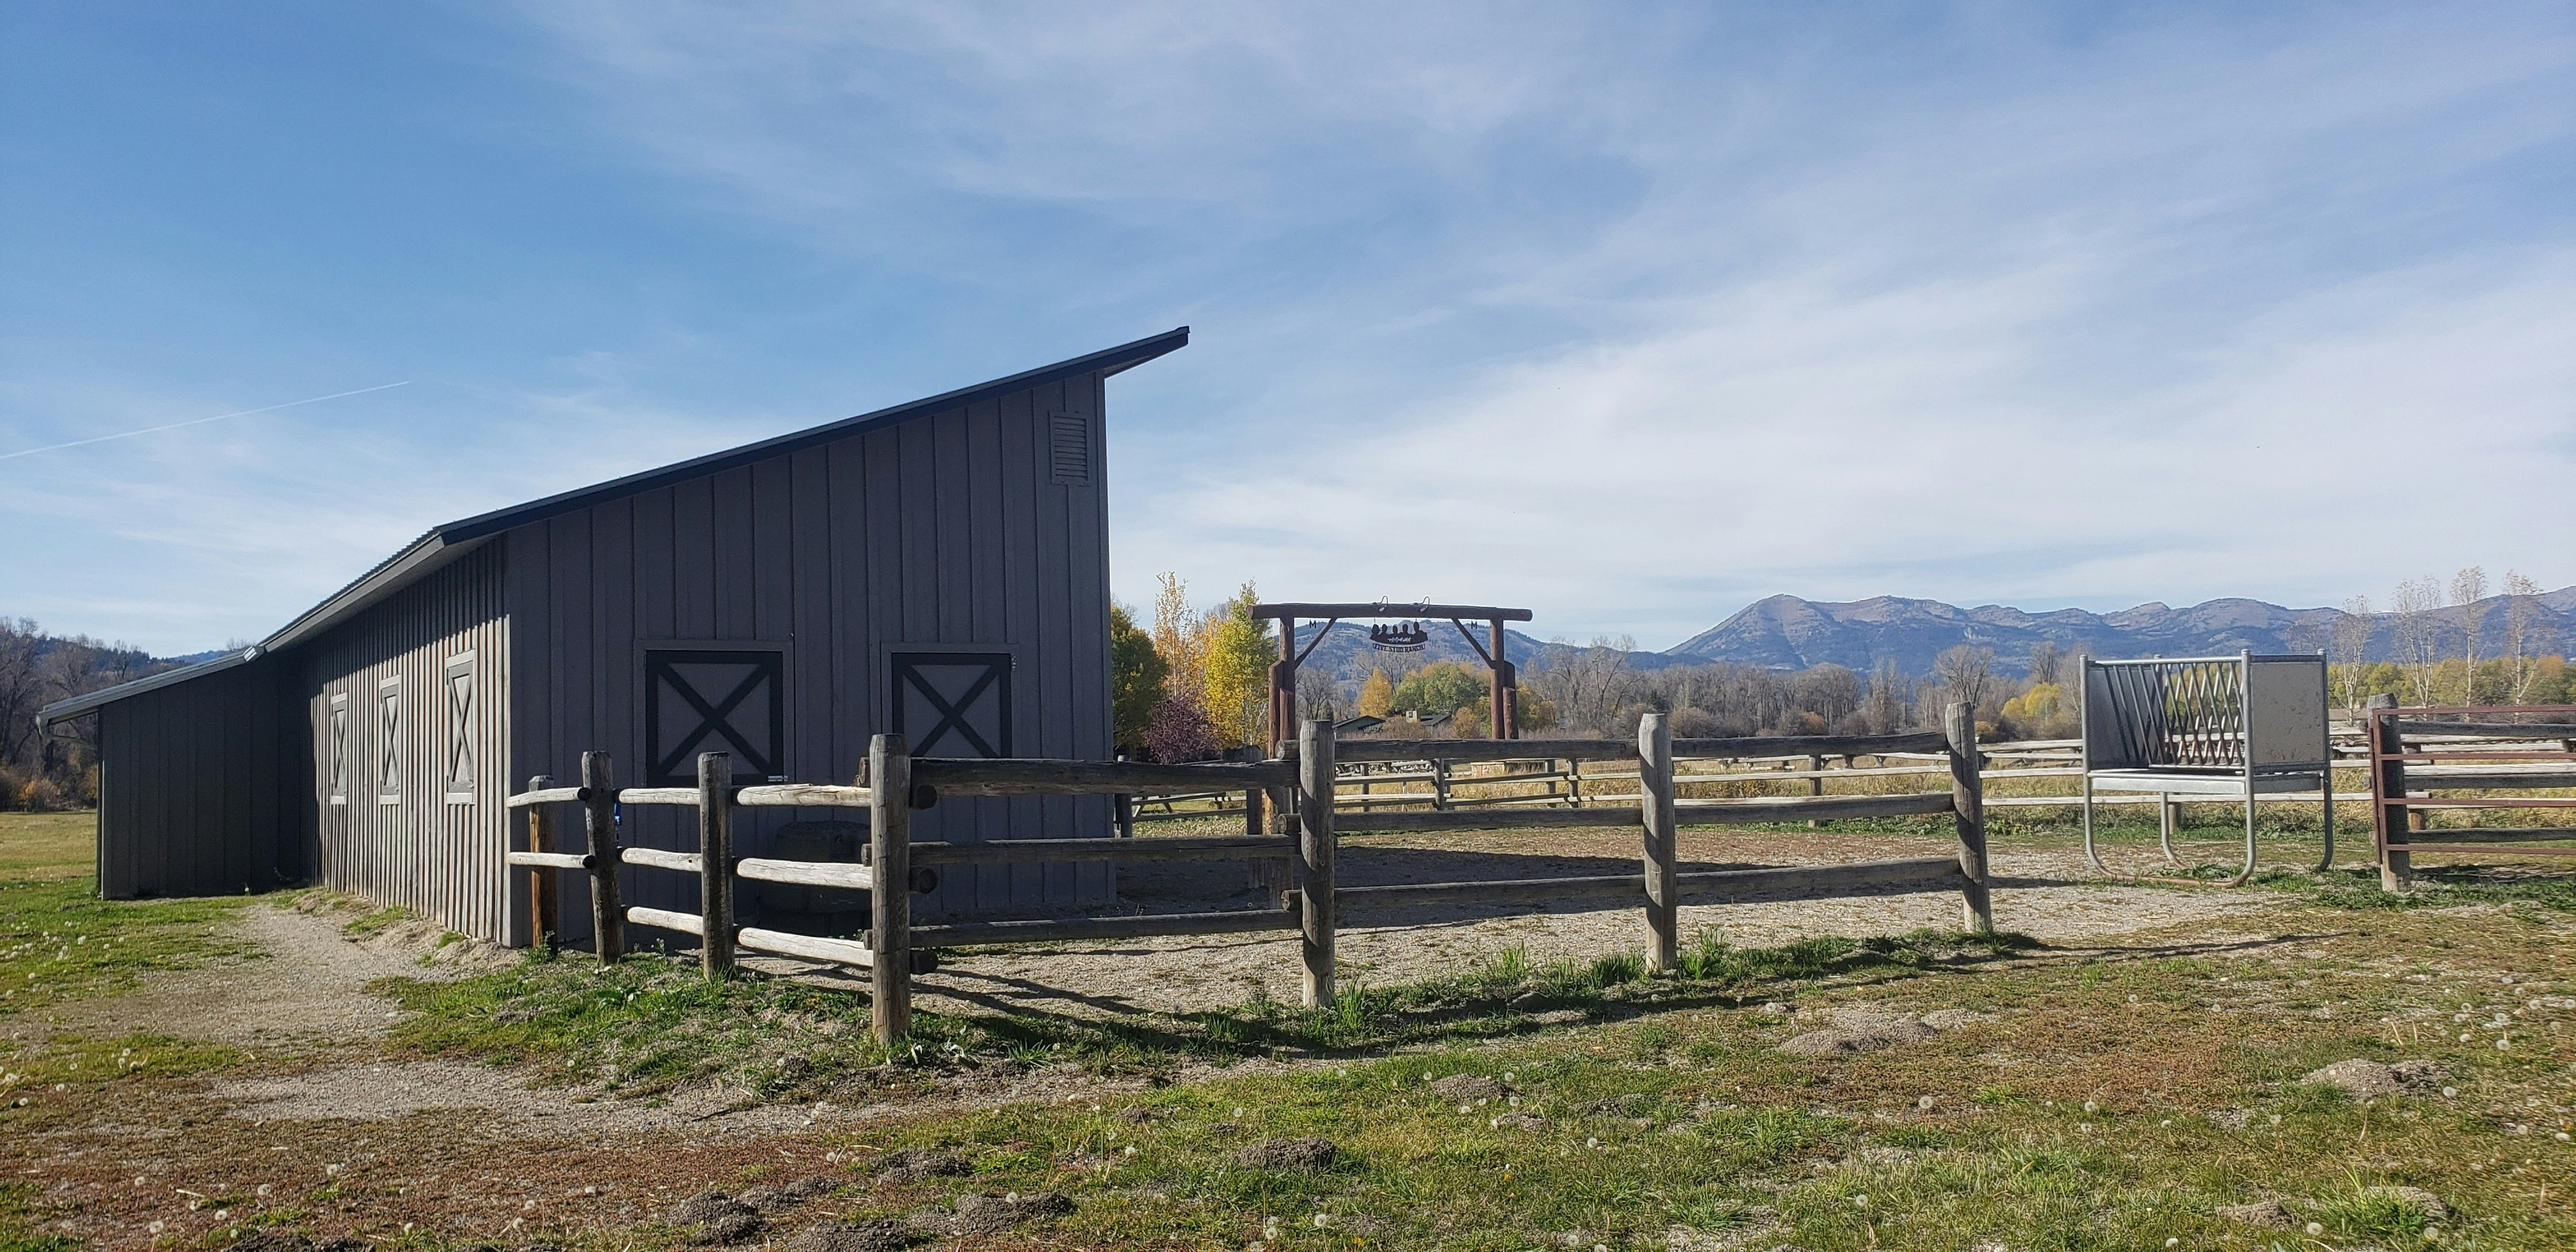 The barn at Western Star Ranch has plenty of room for hay and hay.